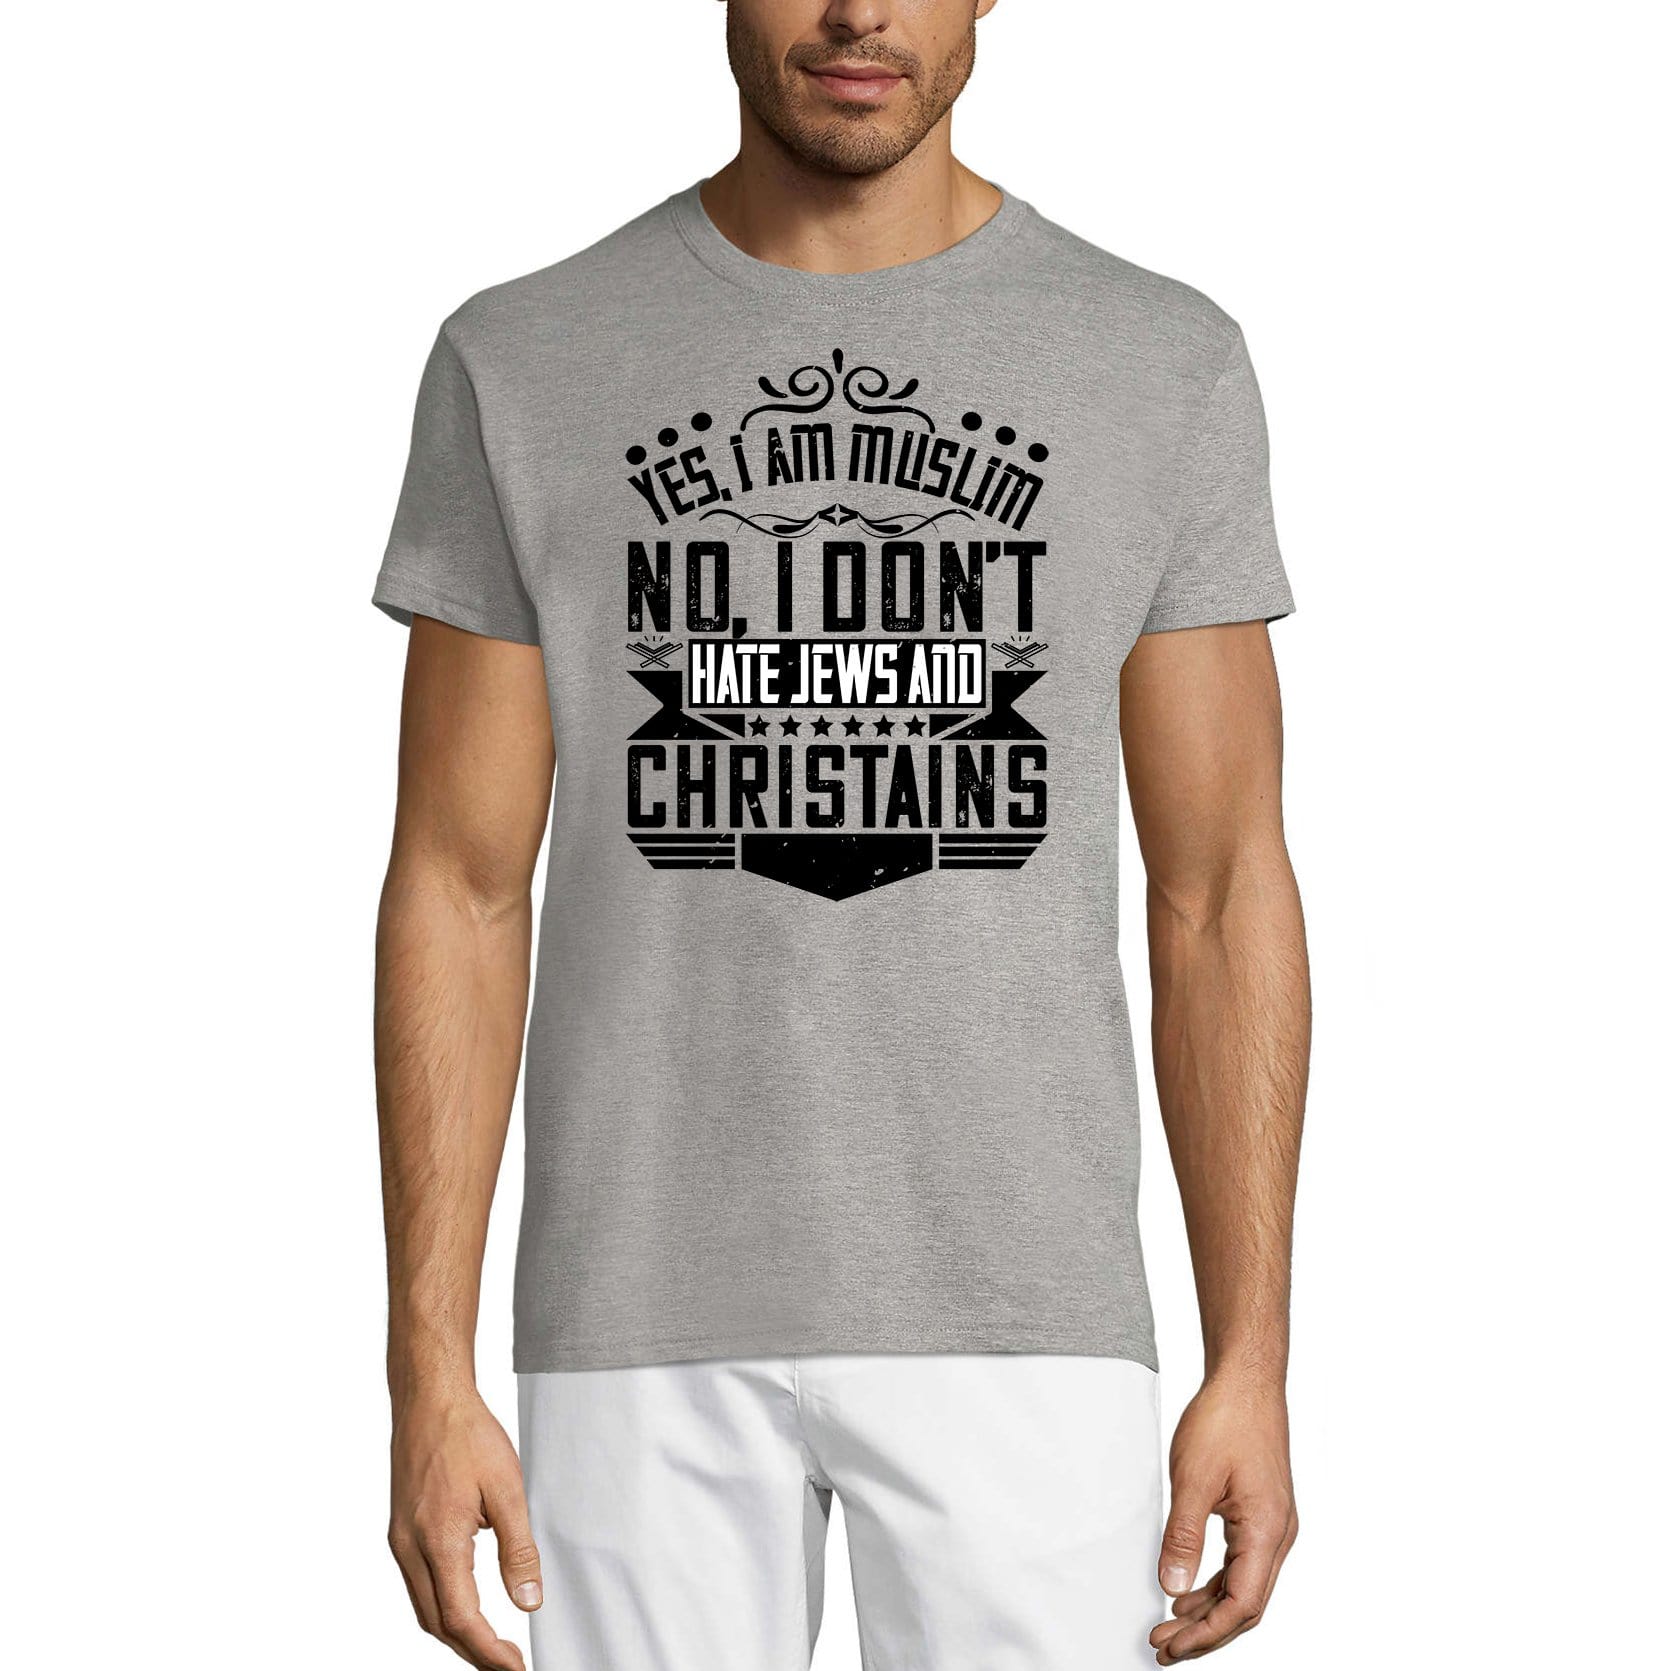 ULTRABASIC Men's T-Shirt I'm Quote - Religious Shirt | affordable t-shirts designs